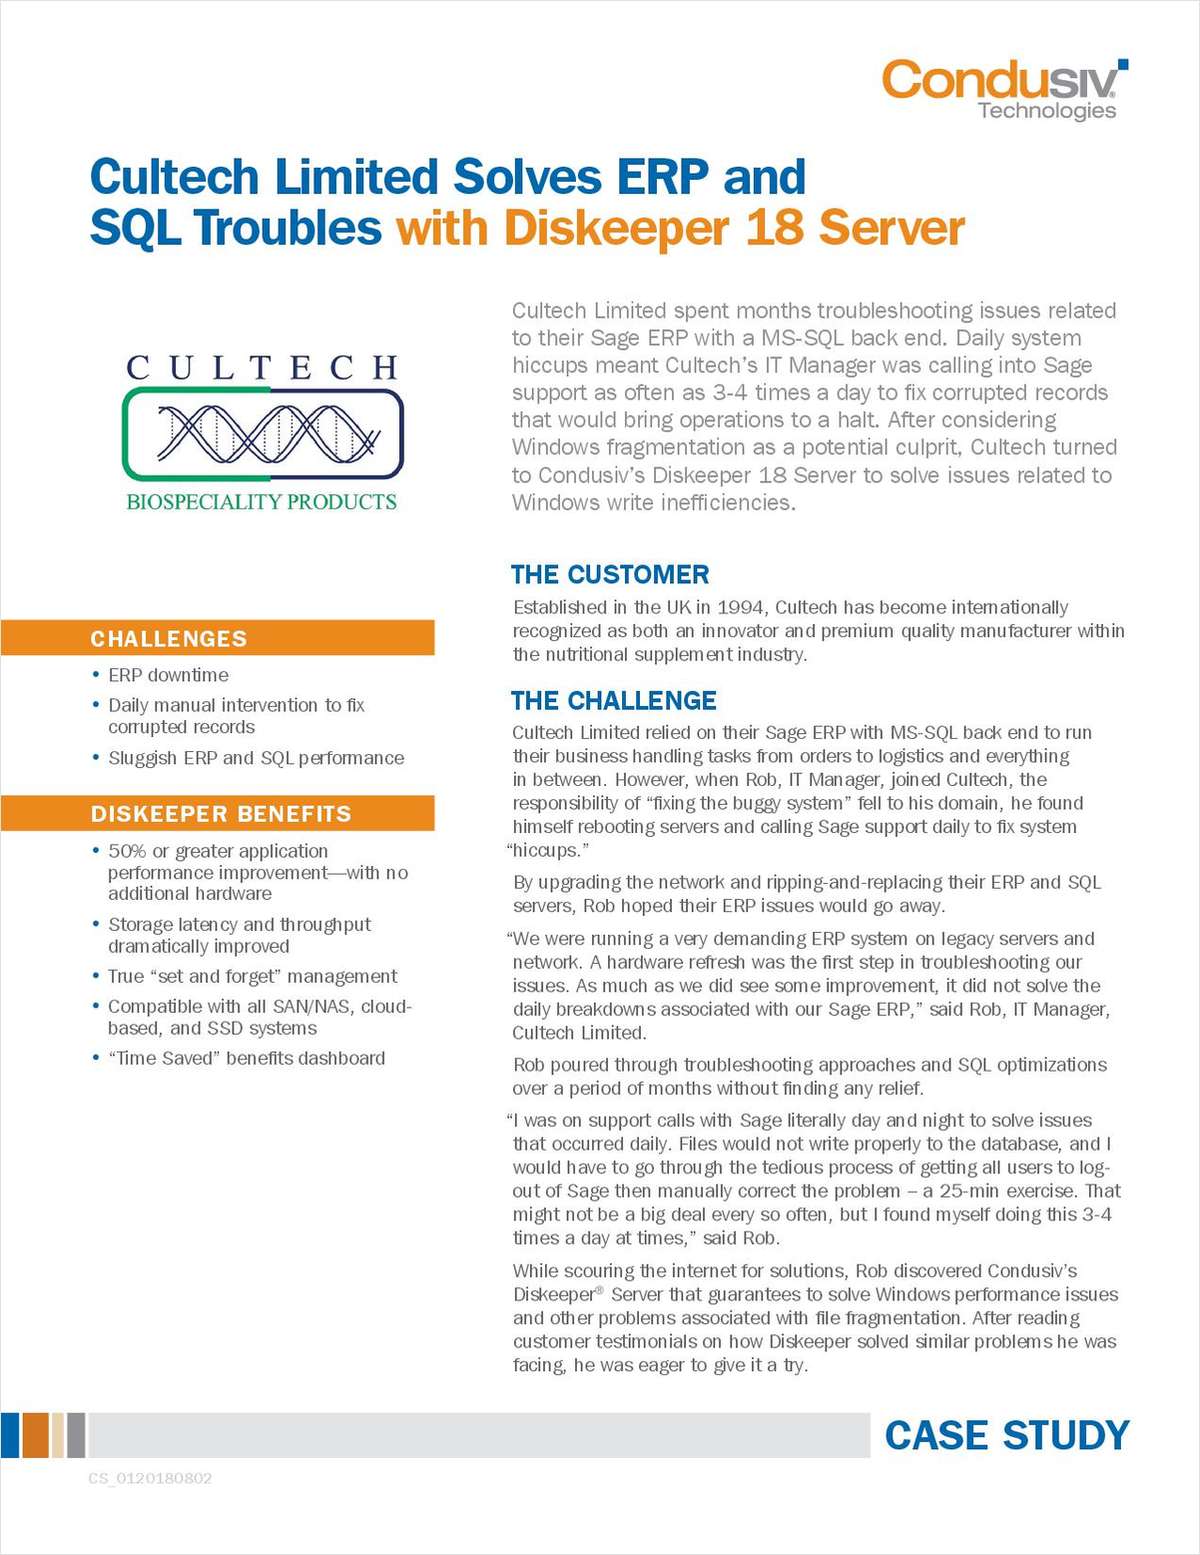 Cultech Limited Solves ERP and SQL Troubles with Diskeeper 18 Server